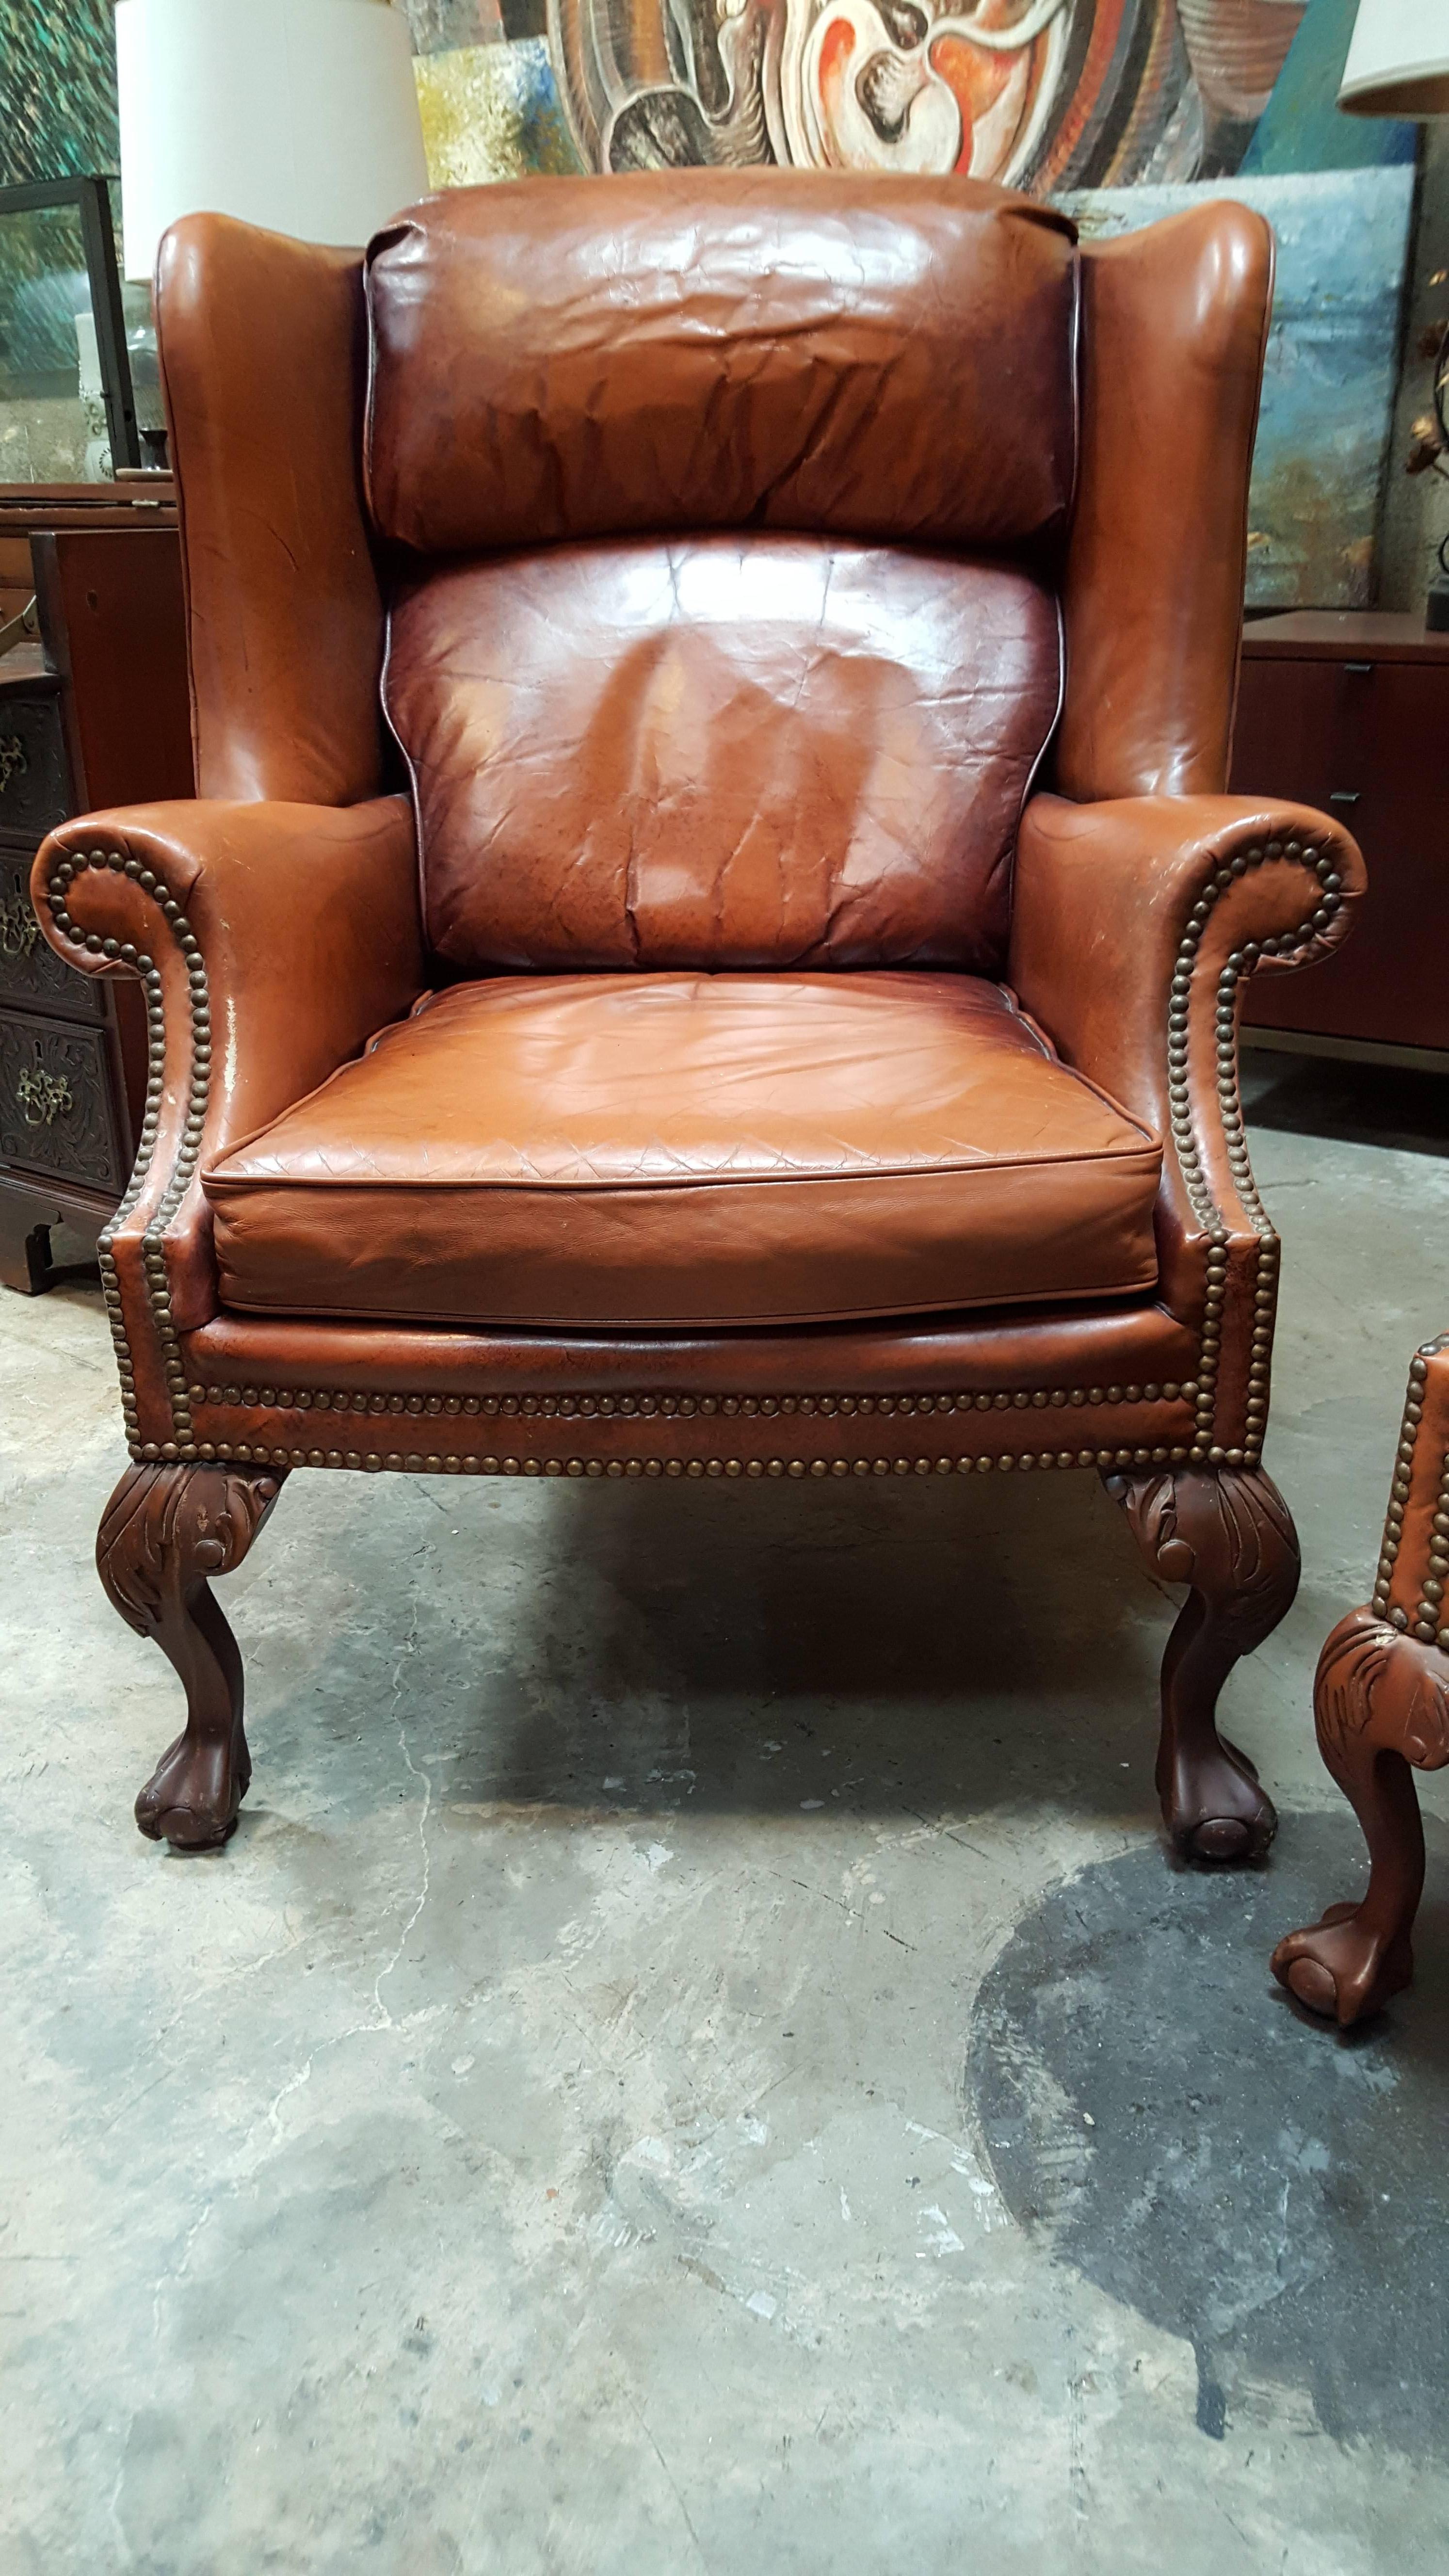 A pair of 20th century leather wing chairs by Schafer Brothers Furniture. Classic carved ball and claw leg and brass nail-head detail. High grade leather with fading and wear, retaining excellent structural integrity. A very comfortable and handsome